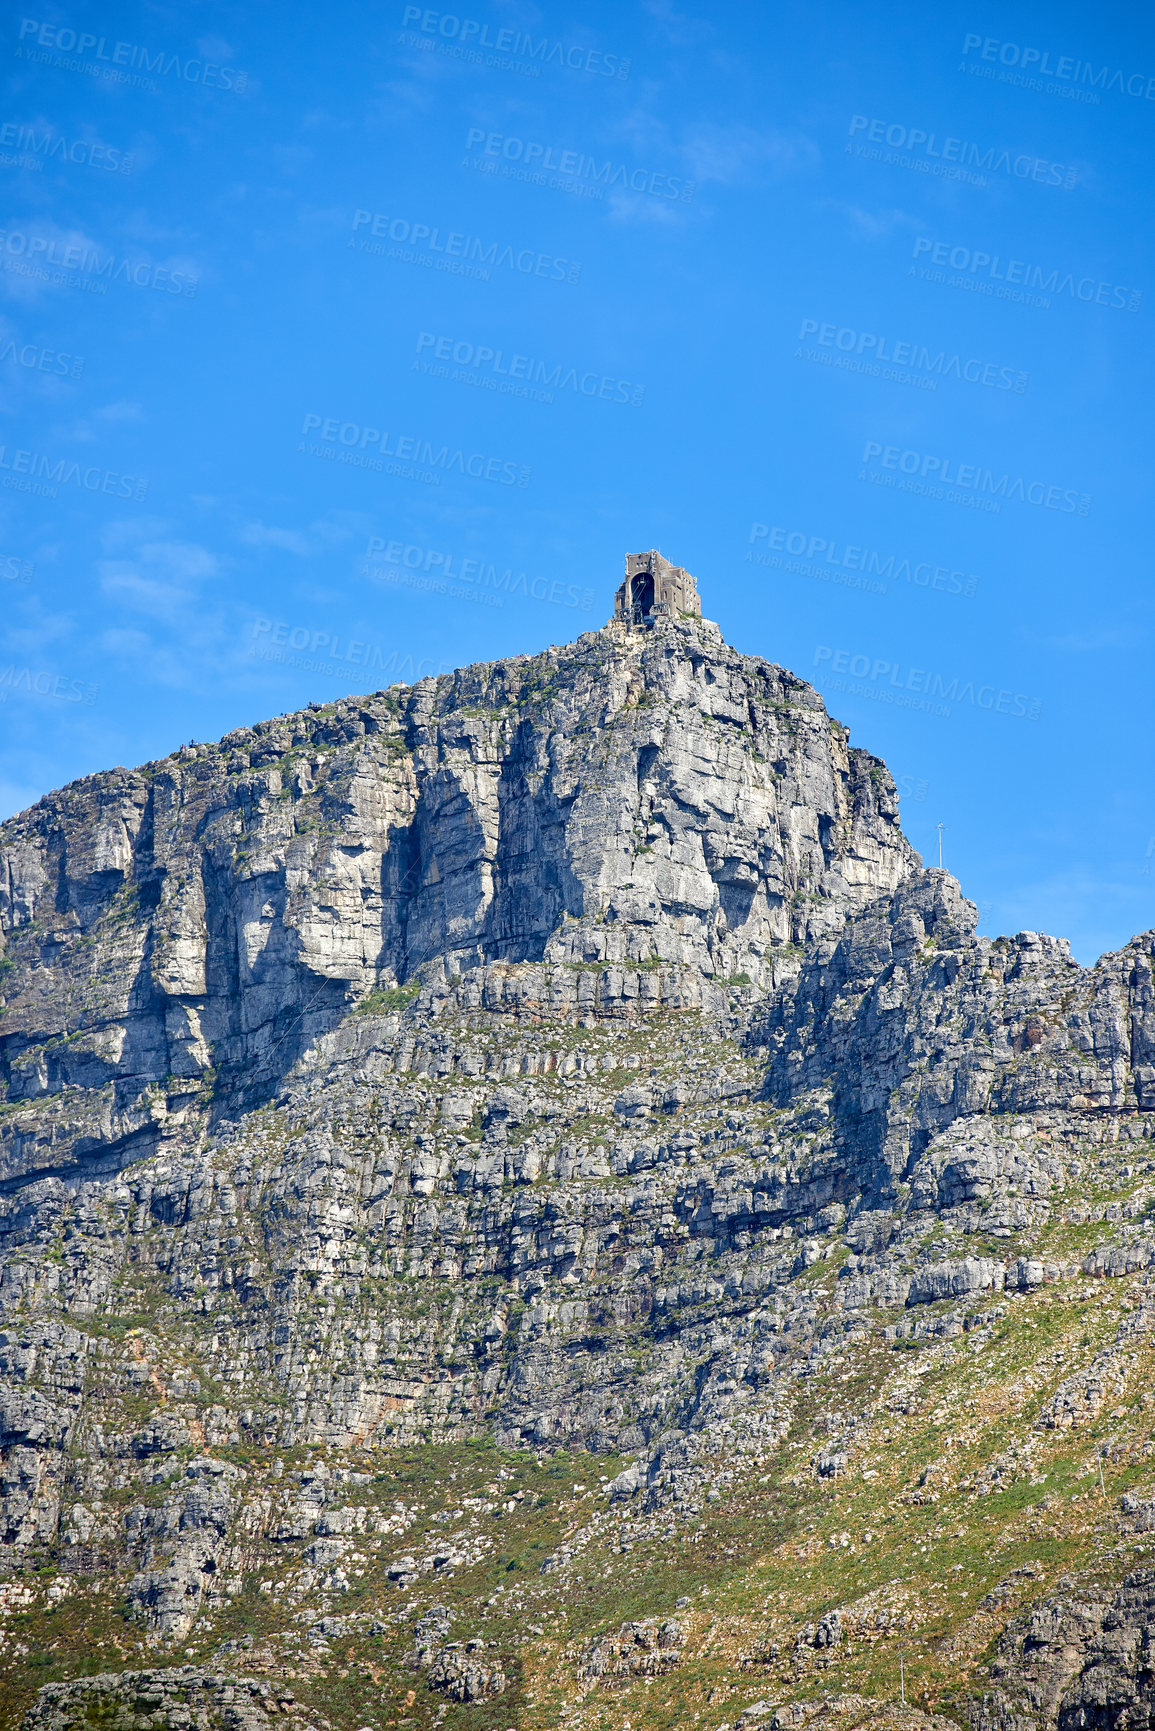 Buy stock photo Copy space with landscape of Table Mountain in Cape Town with a cable car station at the peak against a blue sky background. Beautiful scenic views around an iconic travel destination and landmark